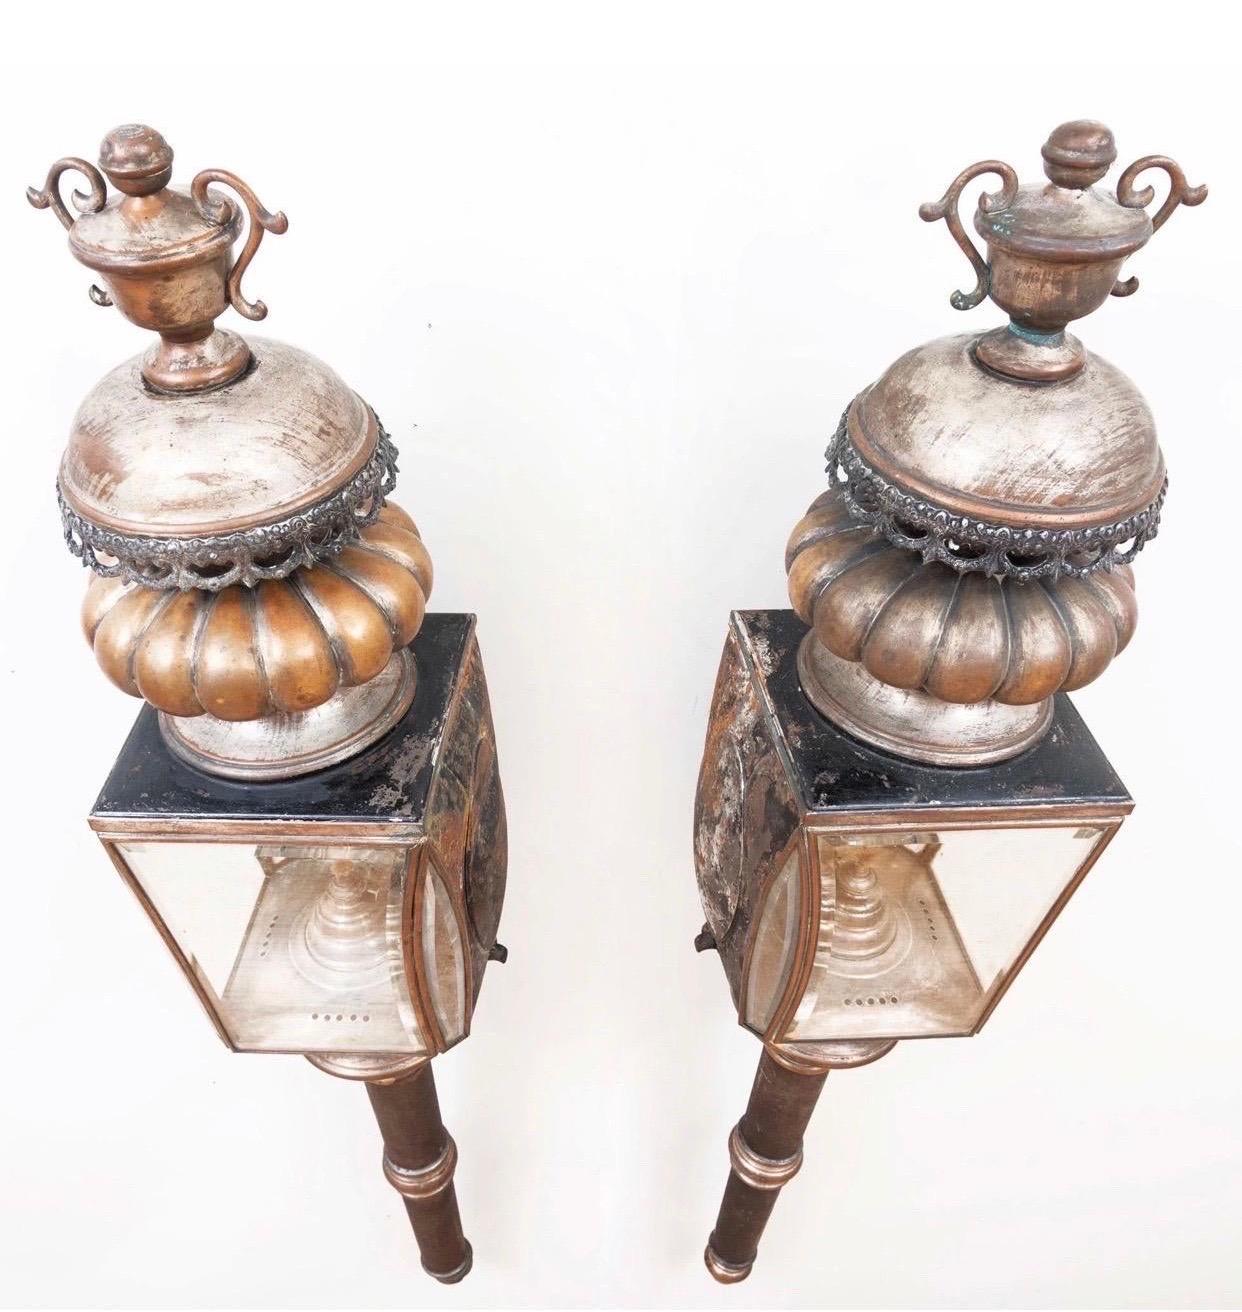 Pair of American coach lanterns with urn finials, floral swag motif, and original beveled glass. Unpolished patina. Rewired and ready to go.